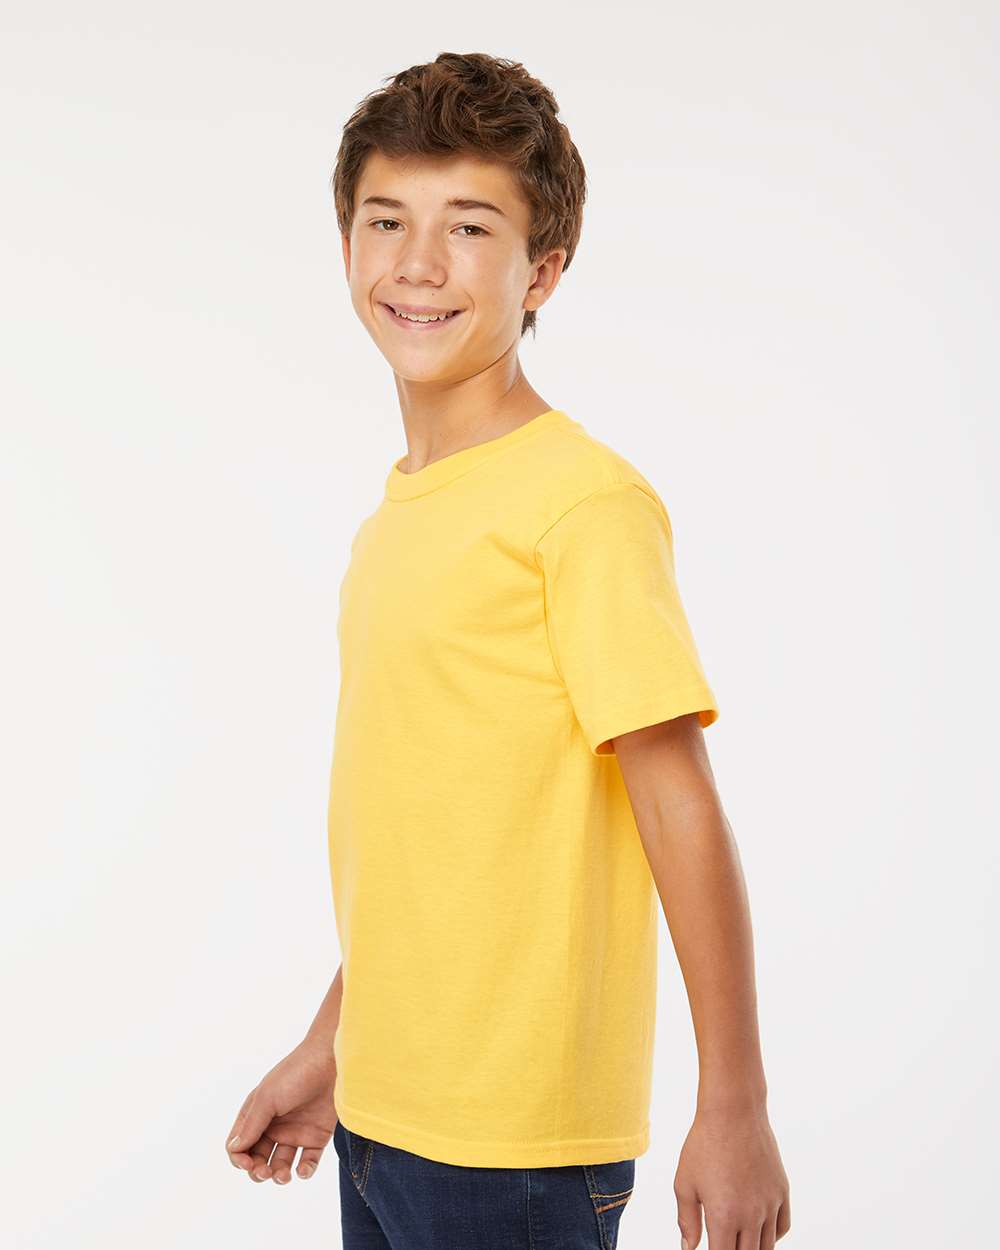 M&O Youth Gold Soft Touch T-Shirt 4850 #colormdl_Yellow